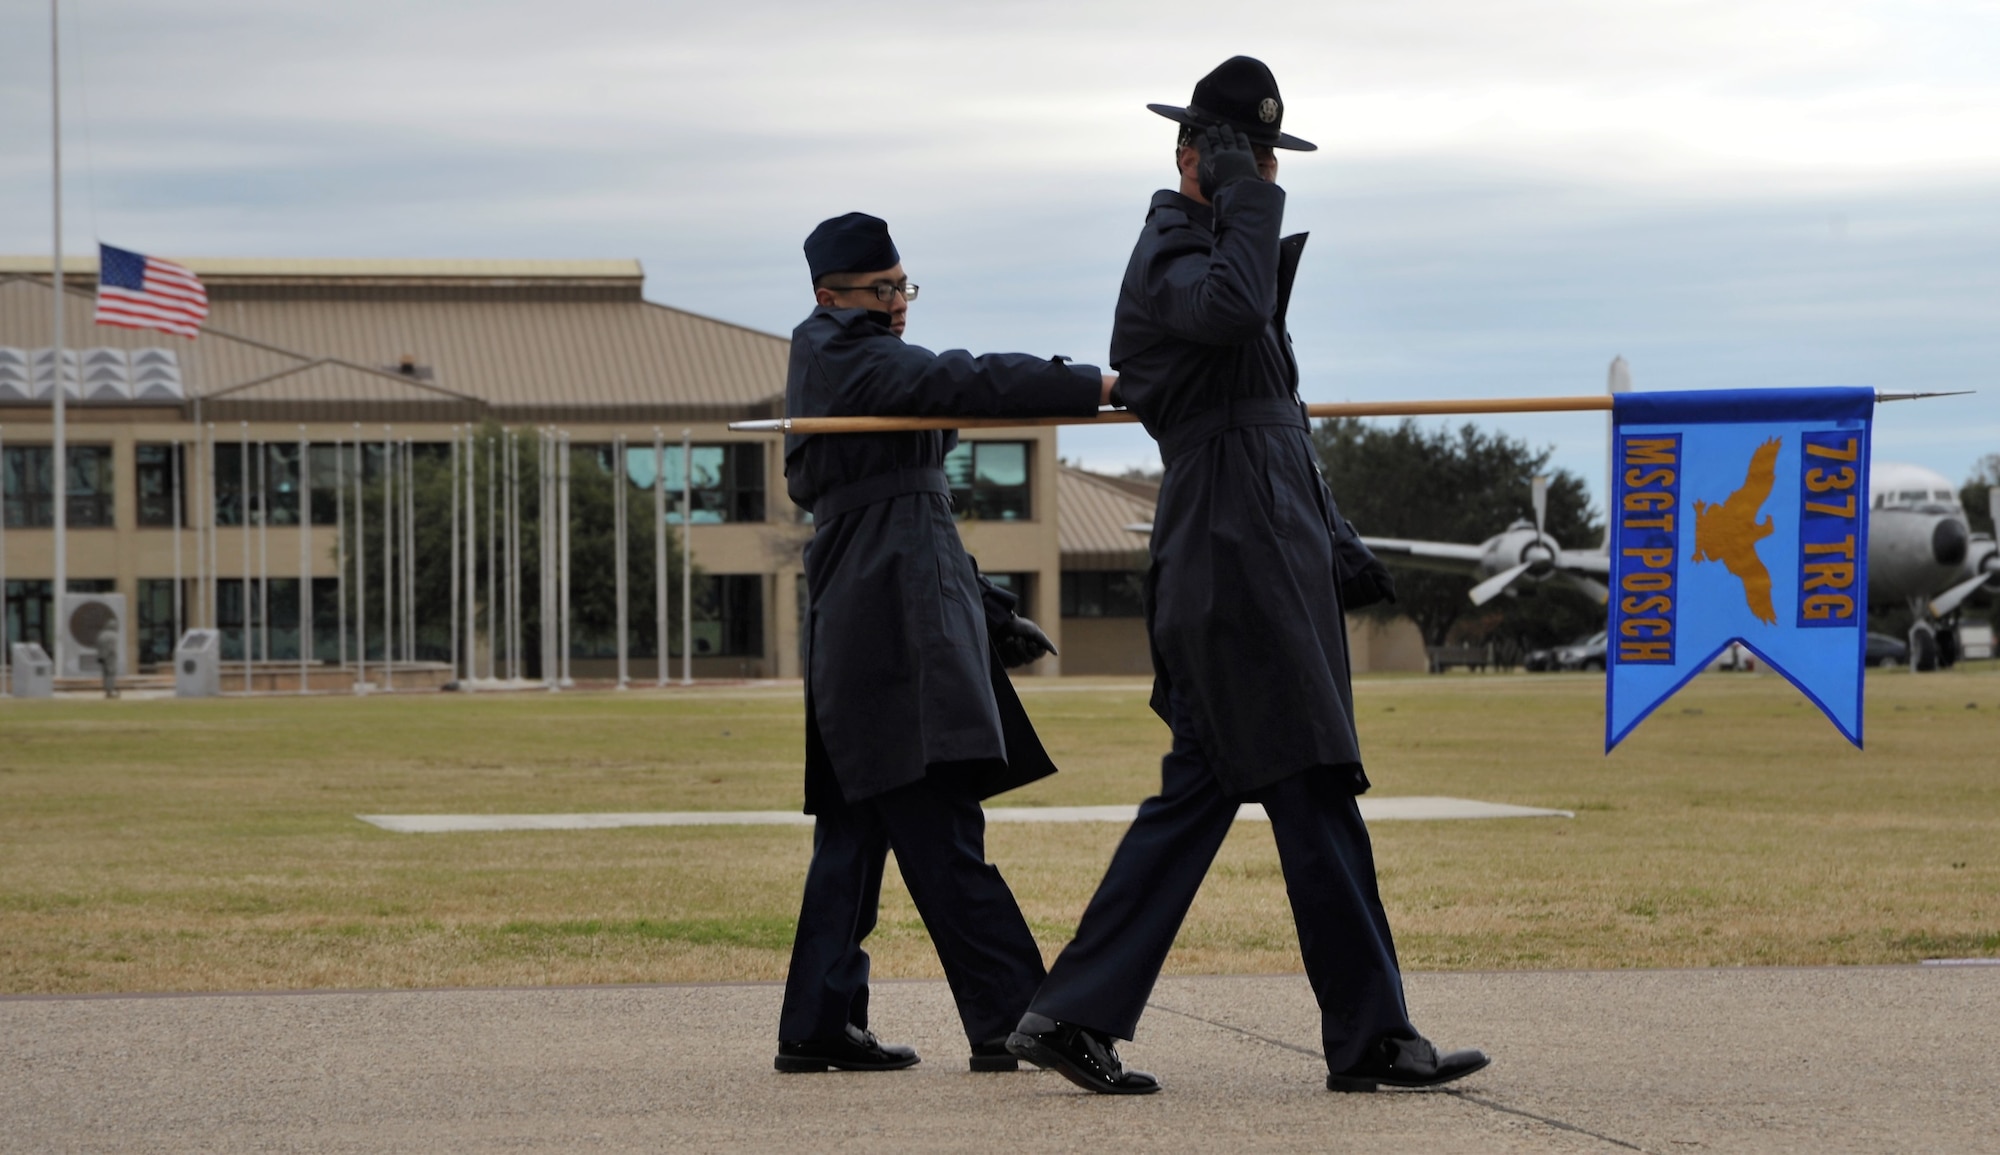 A 433rd Training Squadron basic military training instructor and trainee salute the reviewing official and distinguished guests during the Dec. 14 BMT graduation at Joint Base San Antonio-Lackland, Texas. This flight was named in honor of fallen Reserve Citizen Airmen Pararescueman Master Sgt. William Posch.  (U.S. Air Force photo by Debbie Gildea)